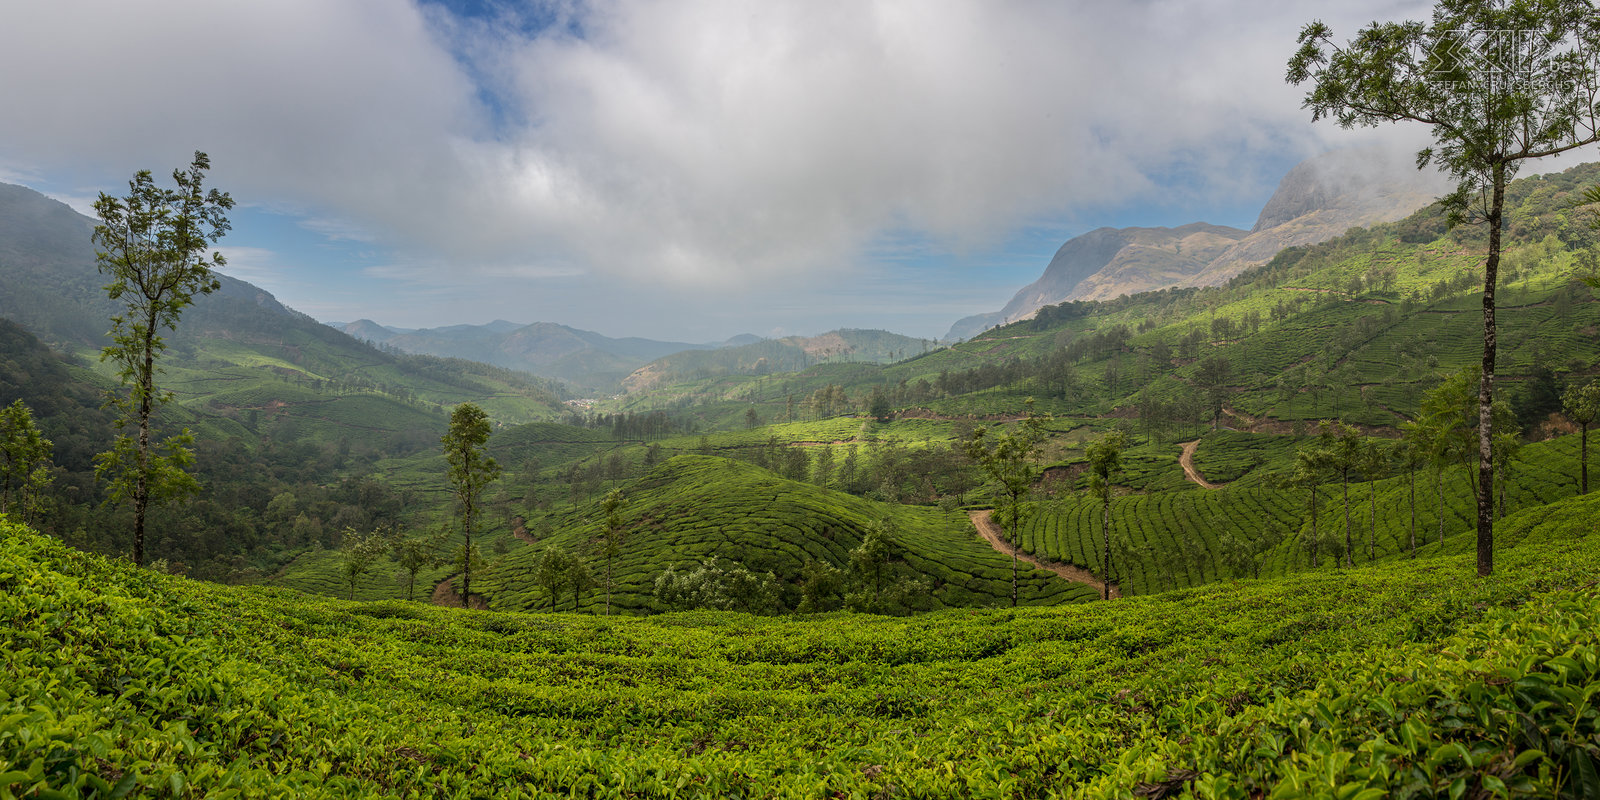 Munnar - Tea fields Munnar is located at the confluence of three mountain rivers at an altitude of 1600 meters above sea level. The town is one of the main centers of the tea industry of the state Kerala. Munnar is a popular tourist destination with its enchanting landscapes with vast tea plantations, colonial bungalows, streams and waterfalls. Previously this 'hill station' was used by British colonists as a summer retreat to escape the heat of the lowlands. The pleasant cool climate is ideal for growing spices, coffee and tea. Stefan Cruysberghs